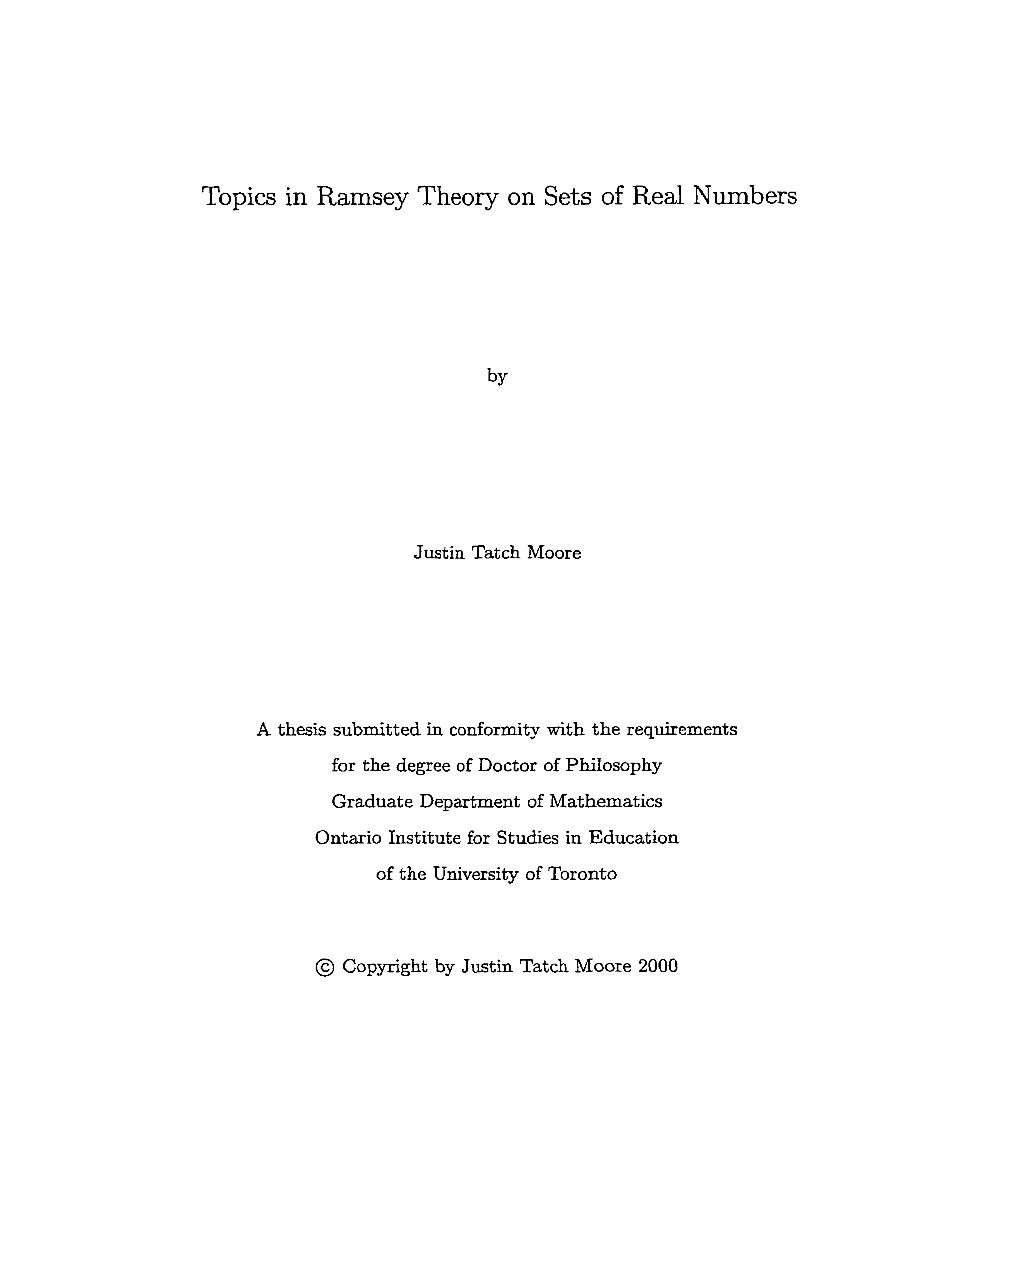 Topics in Ramsey Theory on Sets of Real Numbers